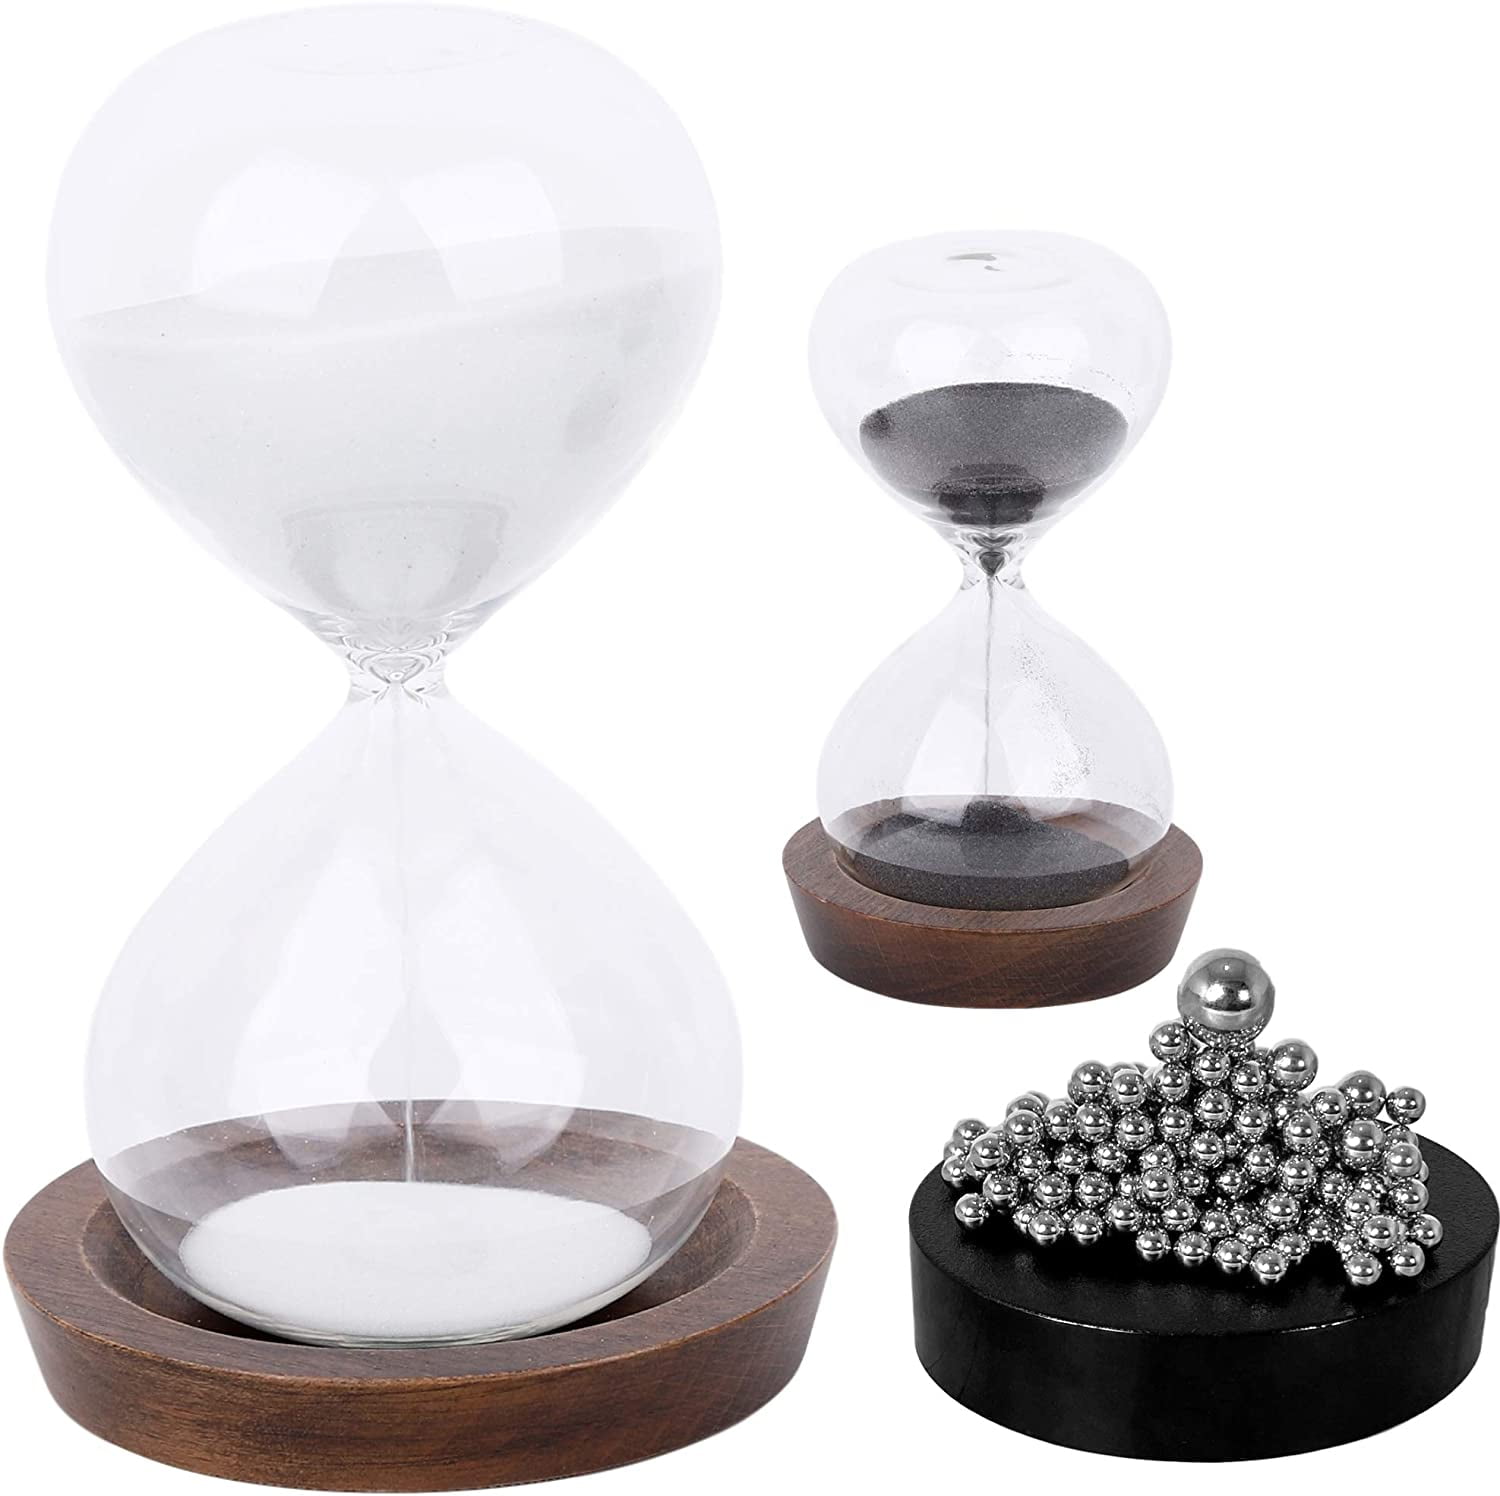 Toilet Hourglass Five Minutes Toilet Styling Decompression Decompression  Toy Hourglass Home Decor Living Room Decor